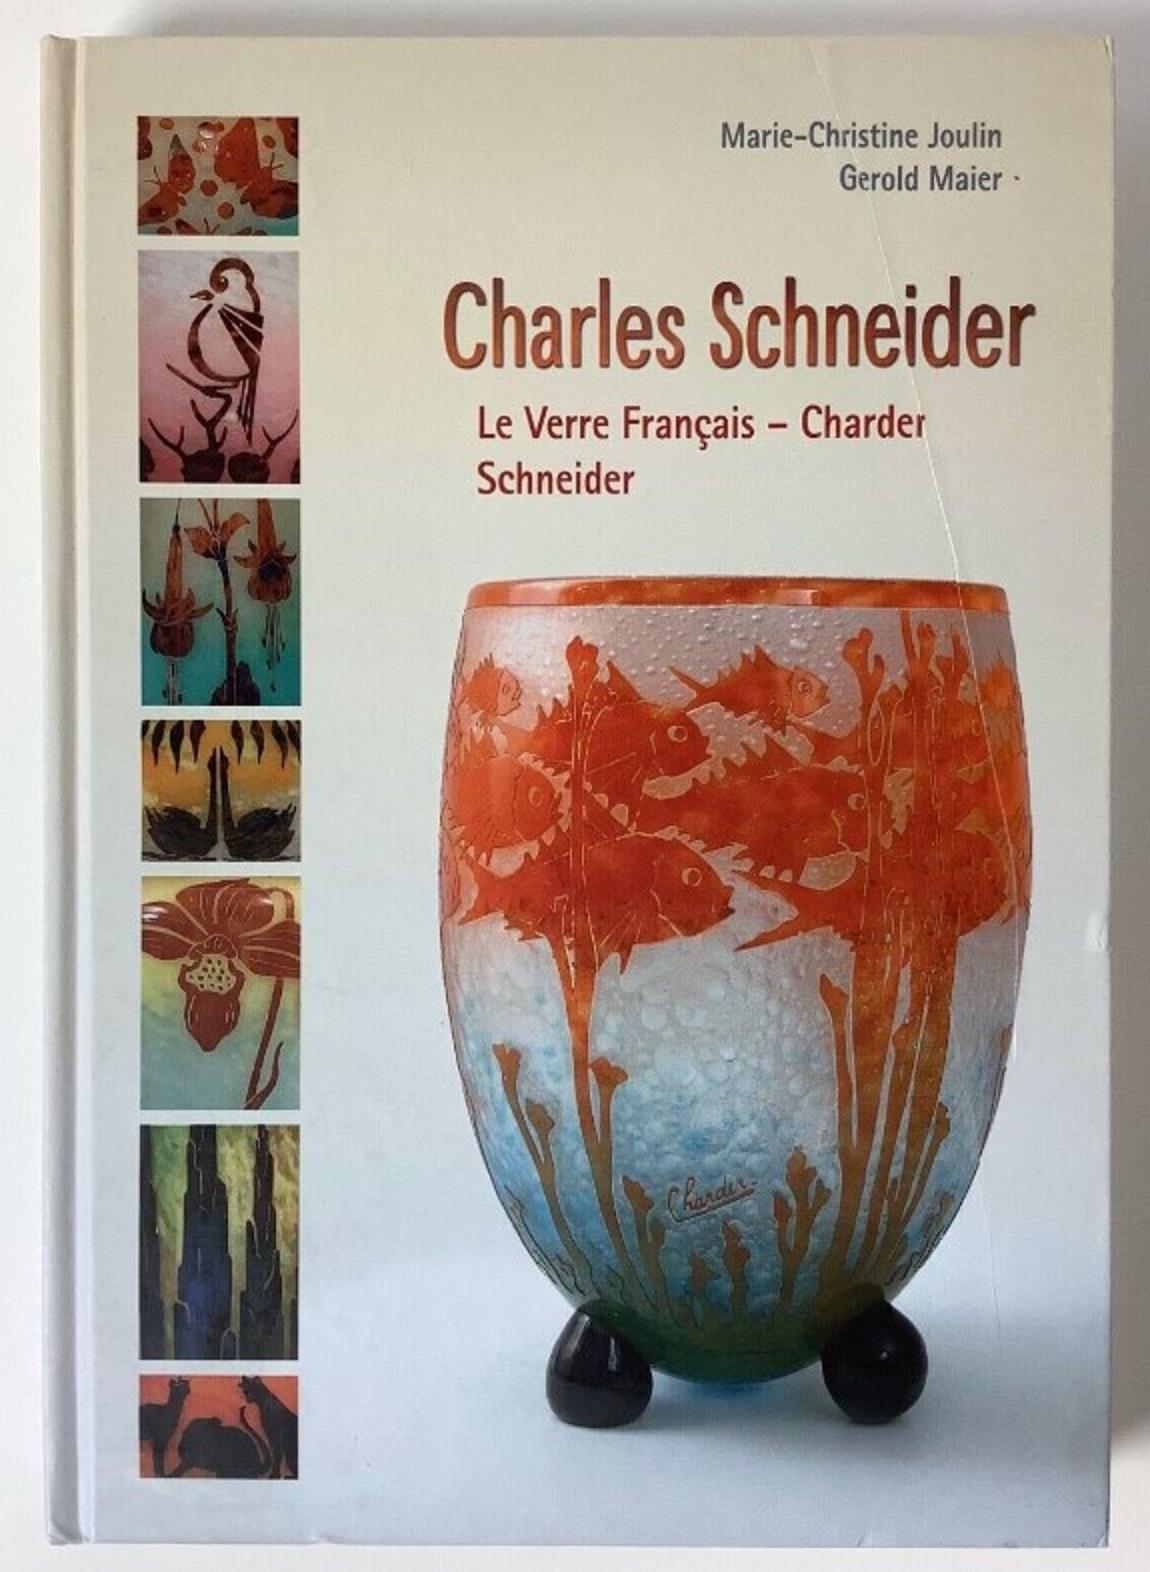 Sign: Charder, Le Verre Francais
CHARDER was a name made up from the first part of Charles and the second part of Schnieder. It was sometimes marked on glass designed by Charles Schneider, particularly pieces in the Le Verre Francais line.
Le Verre